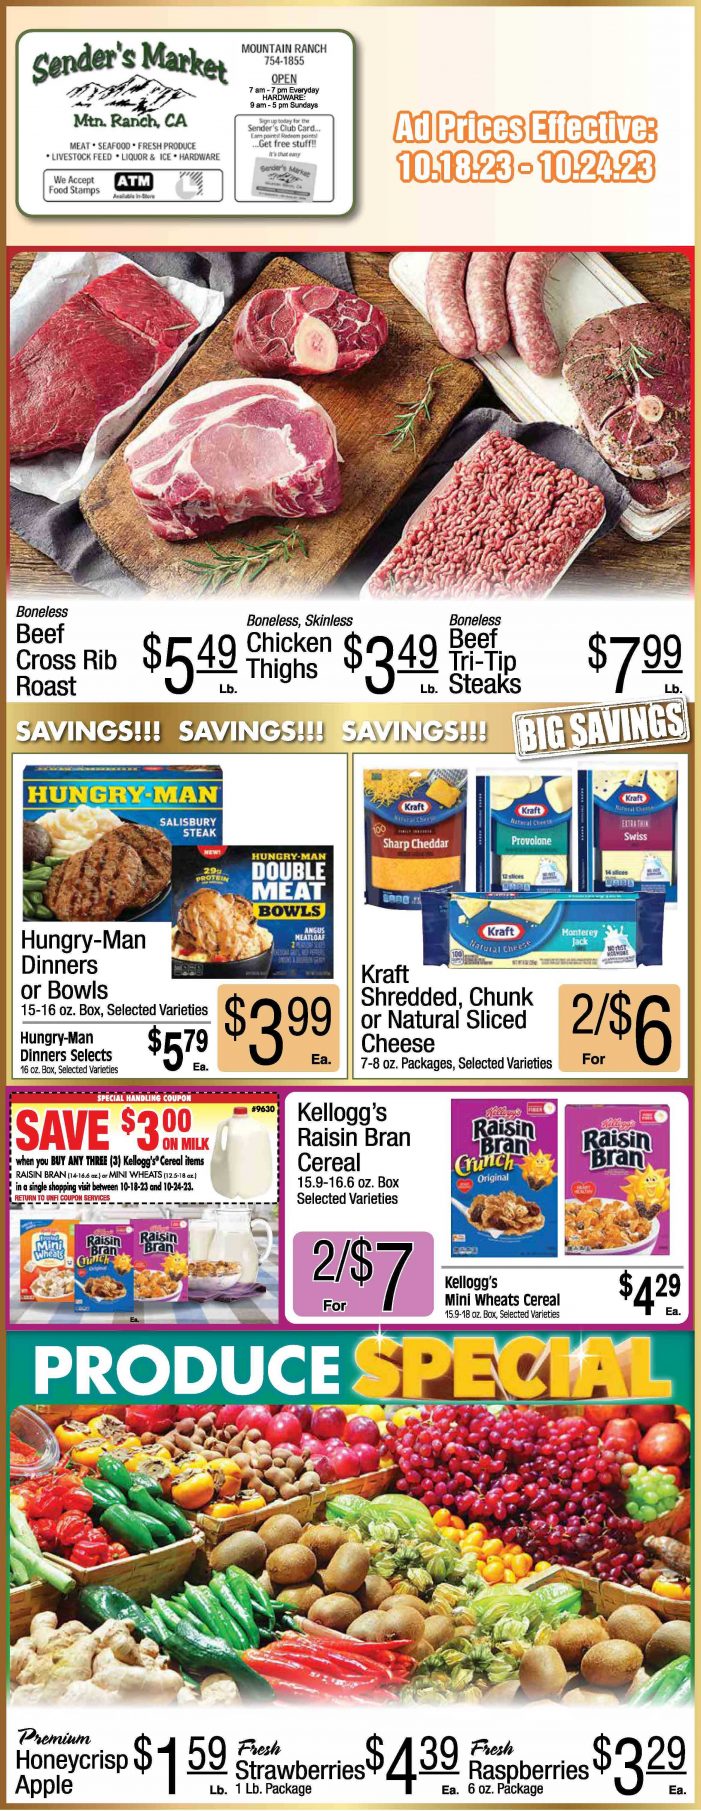 Sender’s Market Weekly Ad & Grocery Specials Through October 24th! Shop Local & Save!!